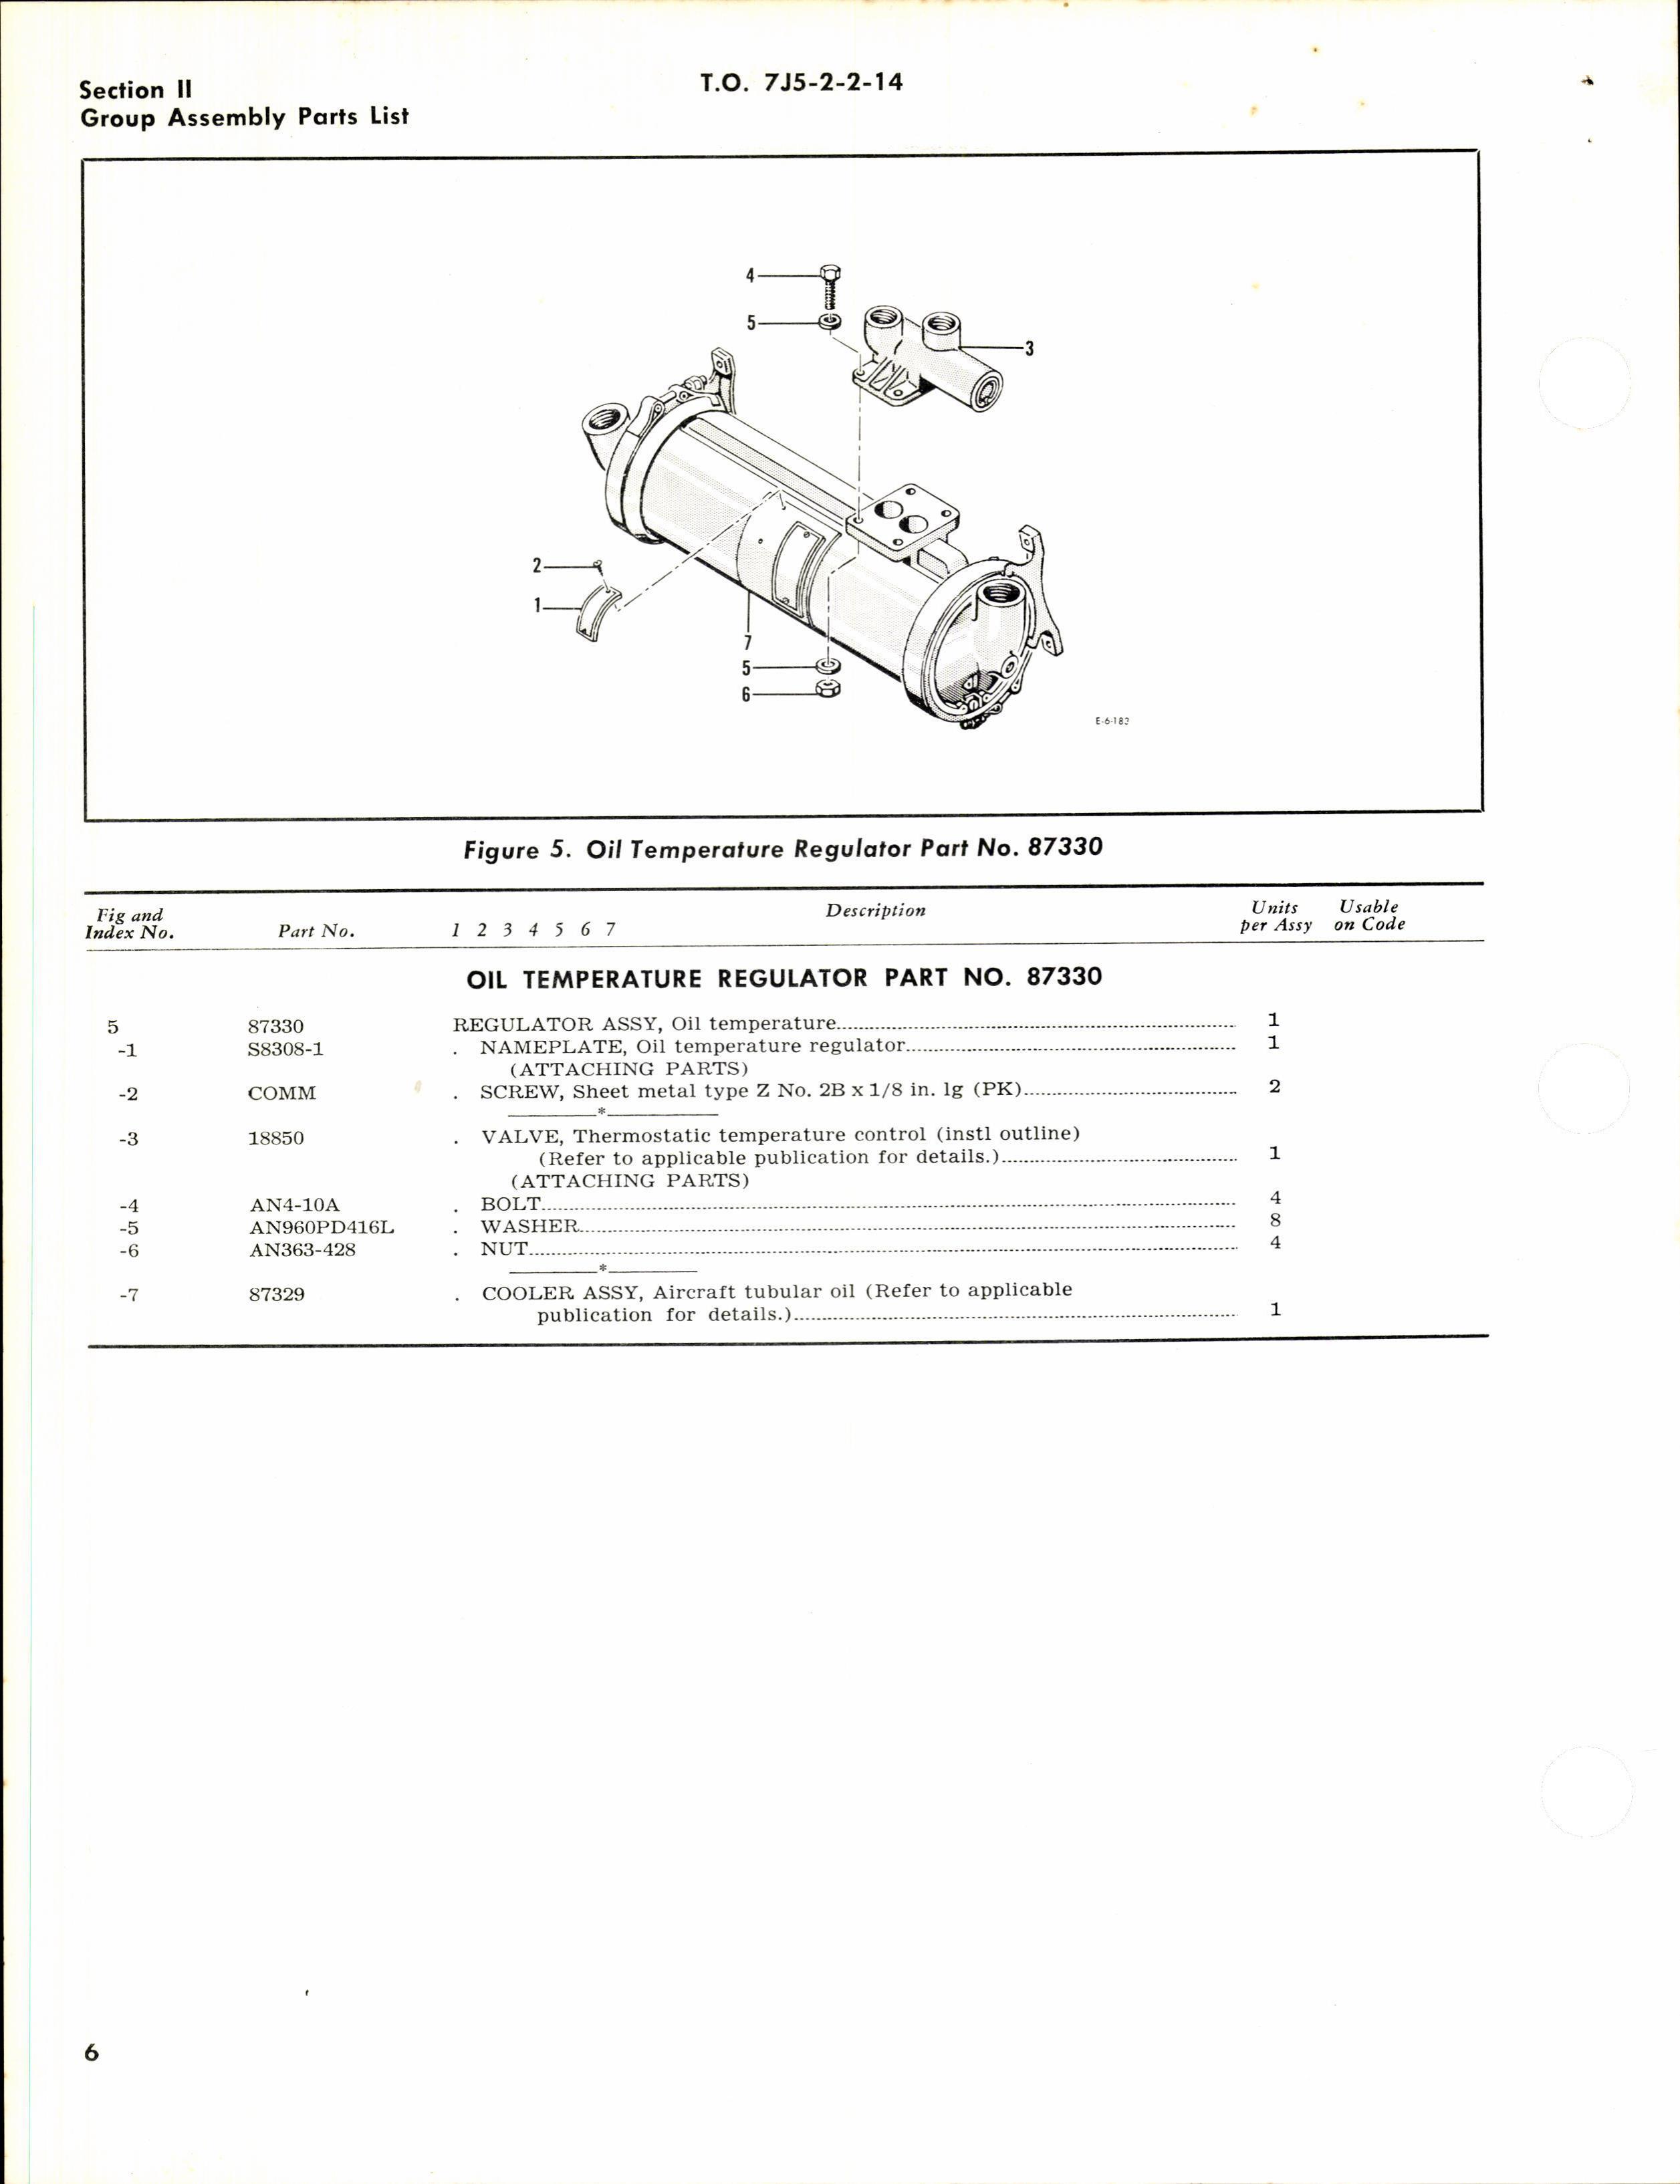 Sample page 8 from AirCorps Library document: Illustrated Parts Breakdown for Oil Temperature Regulators, Heat Exchanges, and Fuel Temperature Regulators 